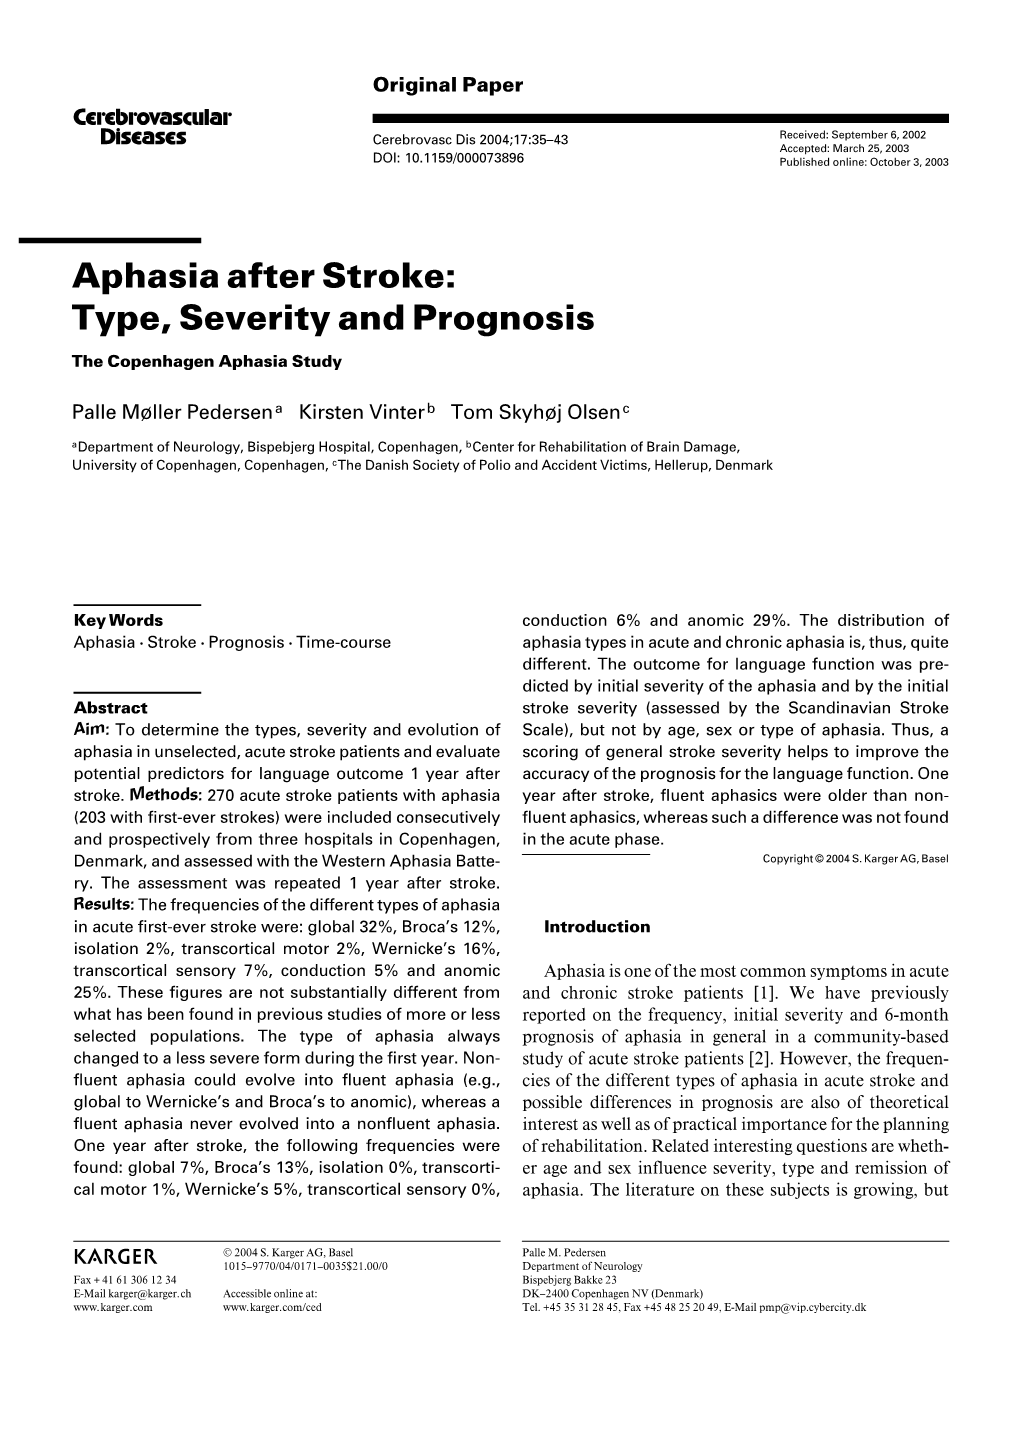 Aphasia After Stroke: Type, Severity and Prognosis